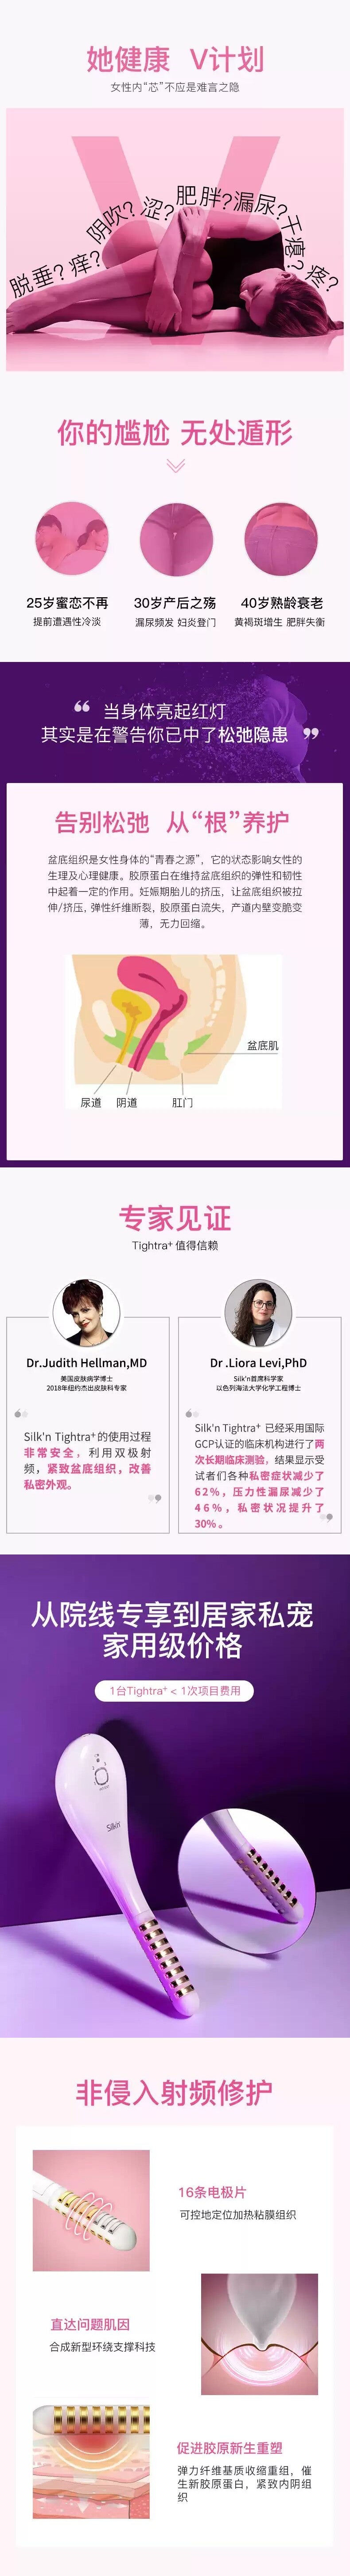 Woman feeling stressed and pressured by poor intimate health such as loose vagina 阴道松弛, vaginal dryness, itchiness, pain, weak pelvic muscles. - Silk'n Tightra 2.0 - BeautyFoo Mall Malaysia